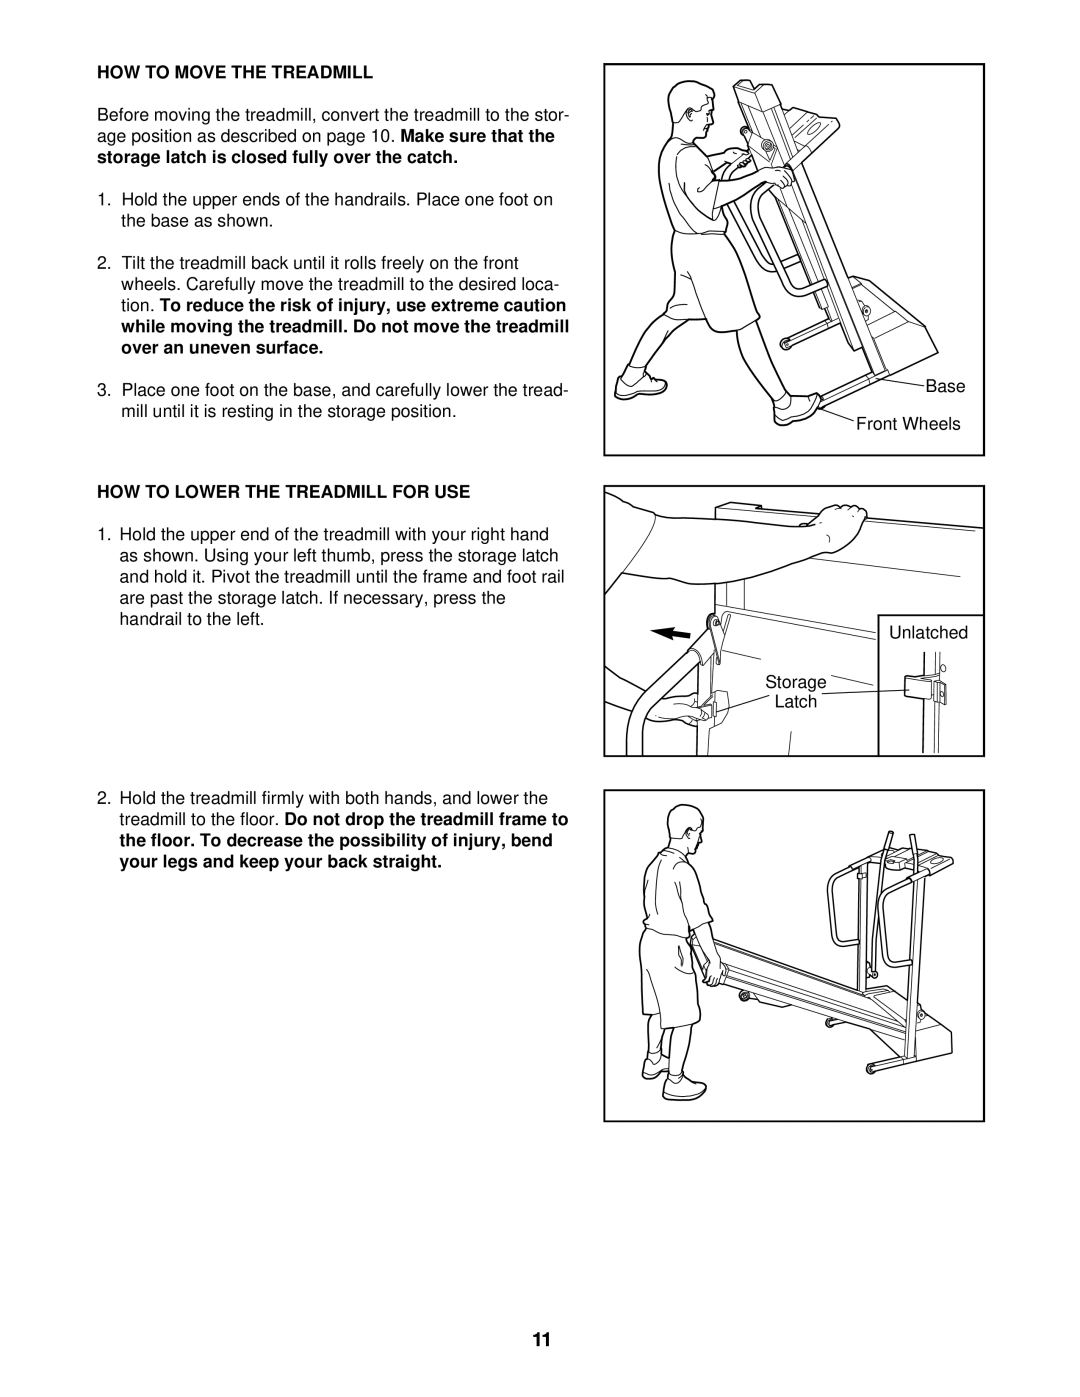 Weslo WCTL38410 user manual How To Move The Treadmill, How To Lower The Treadmill For Use 